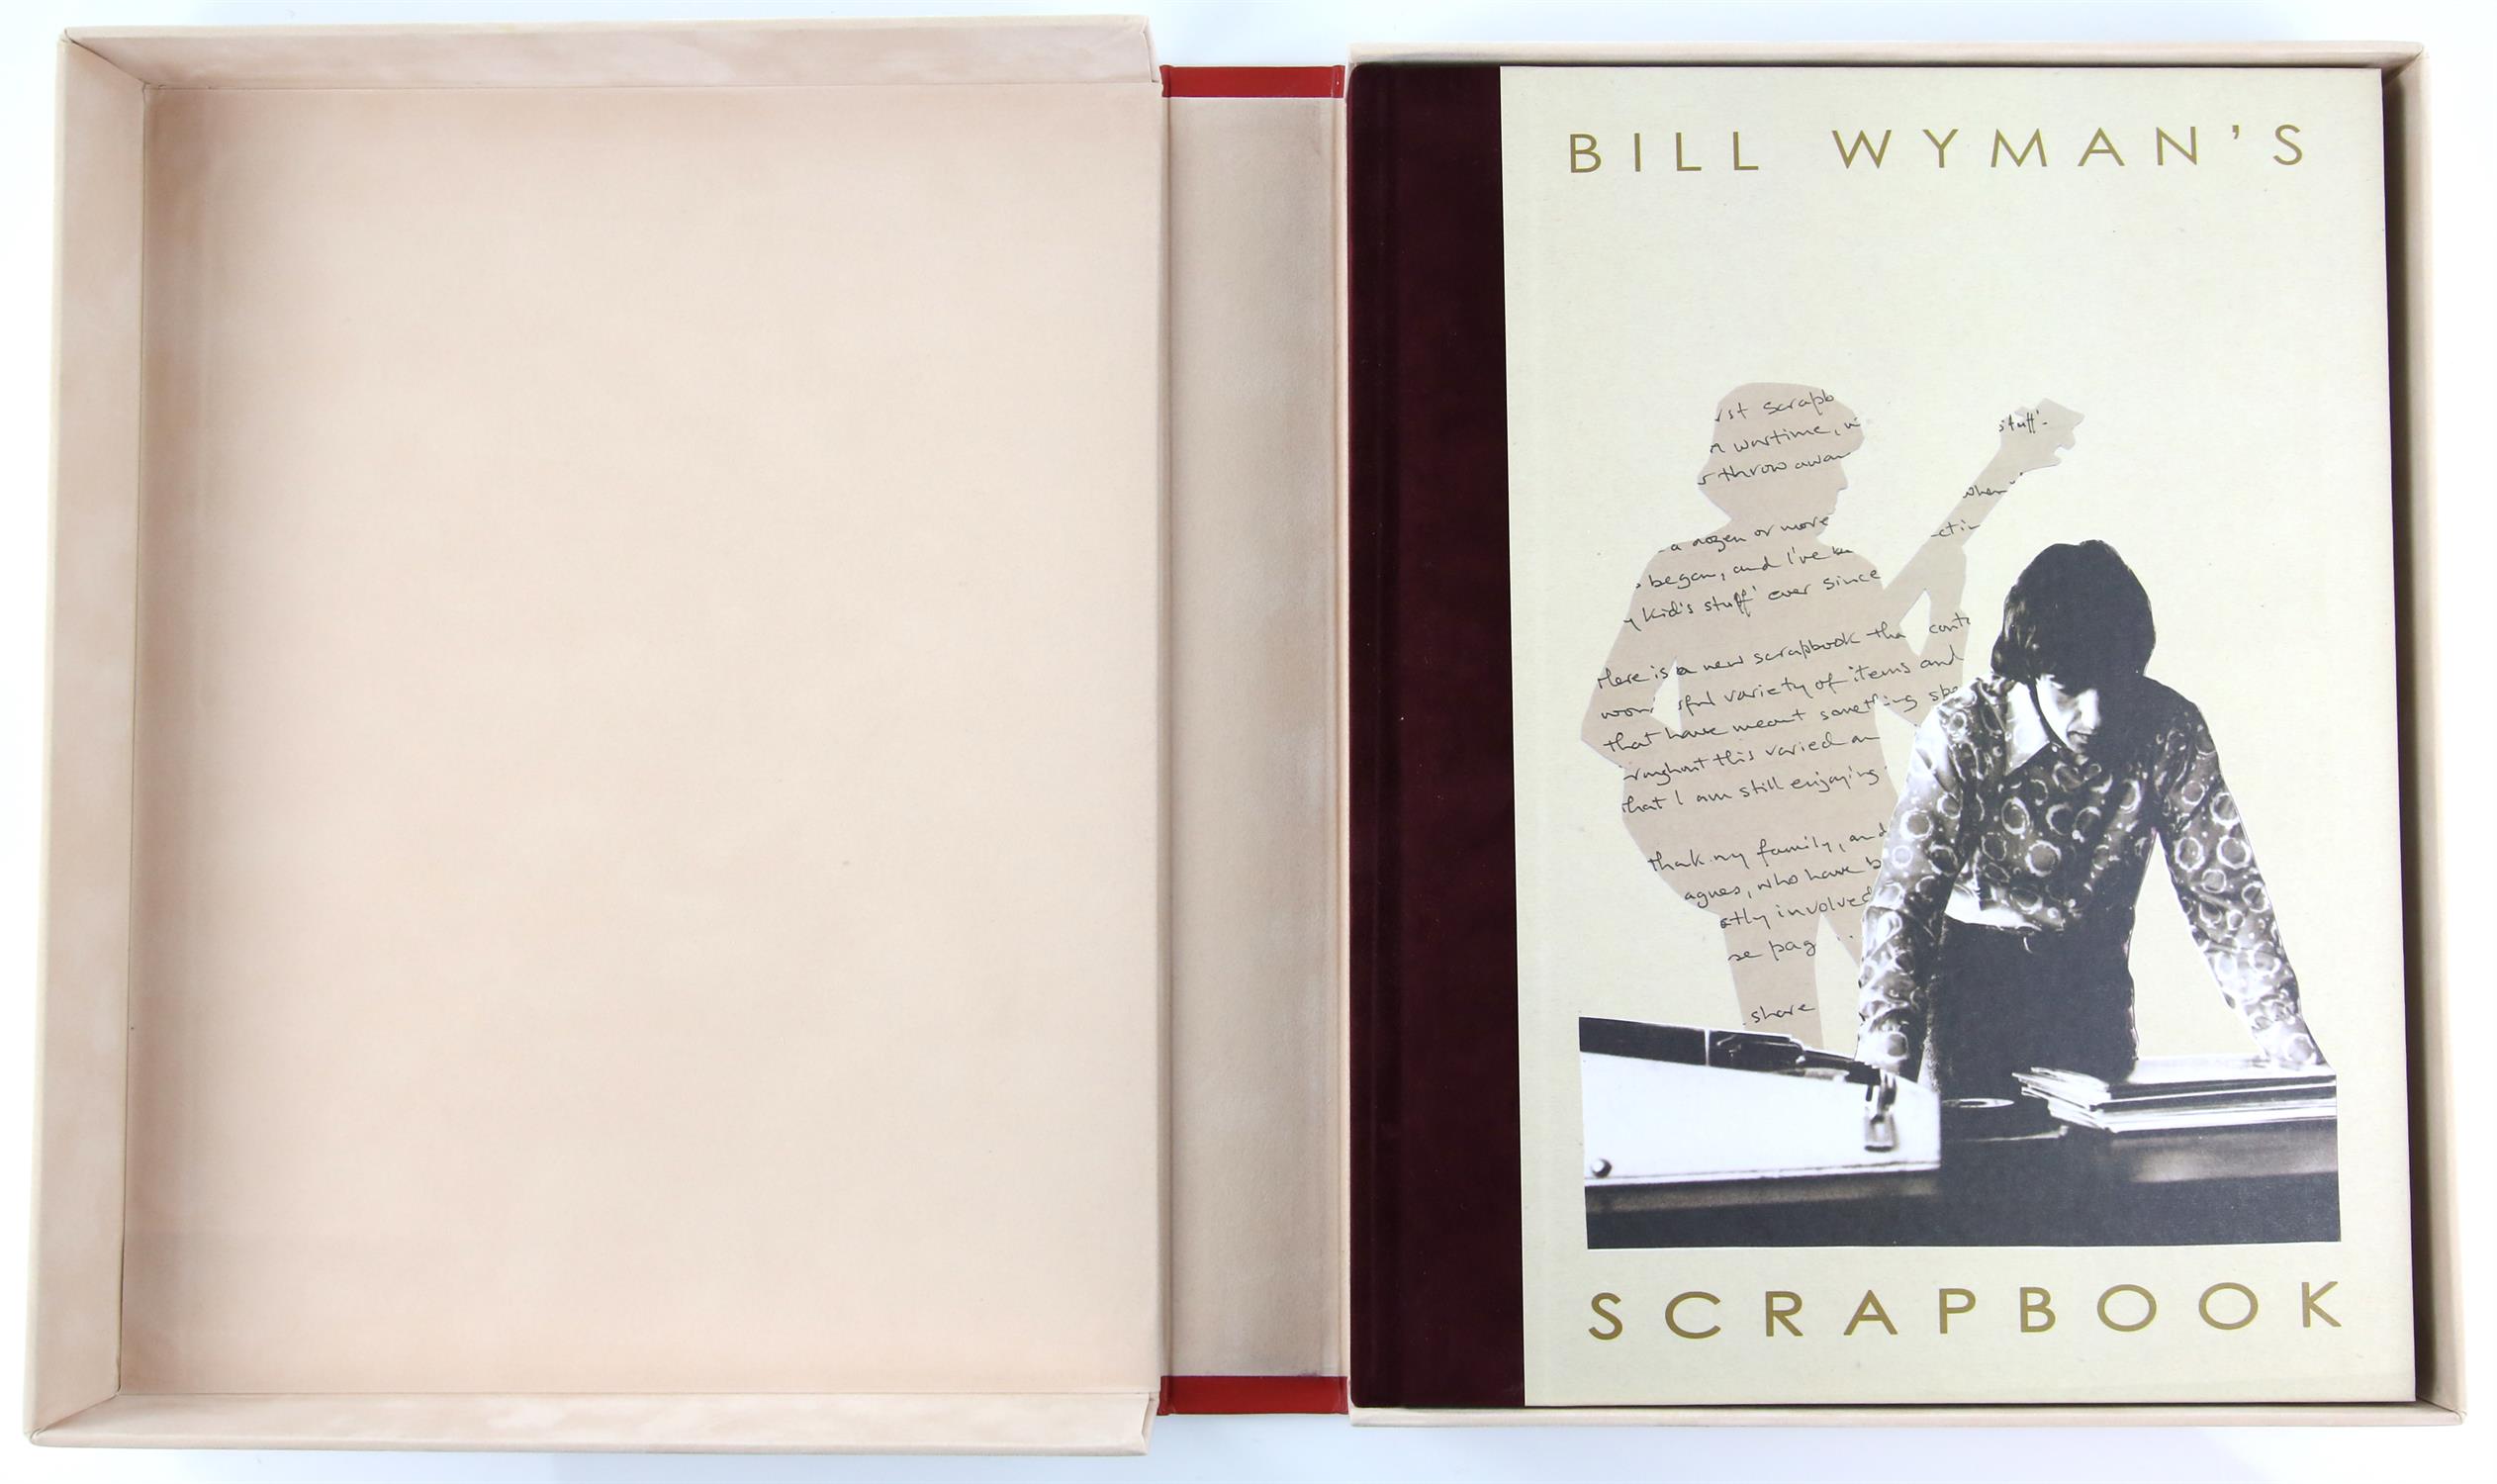 The Rolling Stones / Bill Wyman Scrapbook, Hardback limited edition book, numbered 0816/1962, - Image 16 of 21